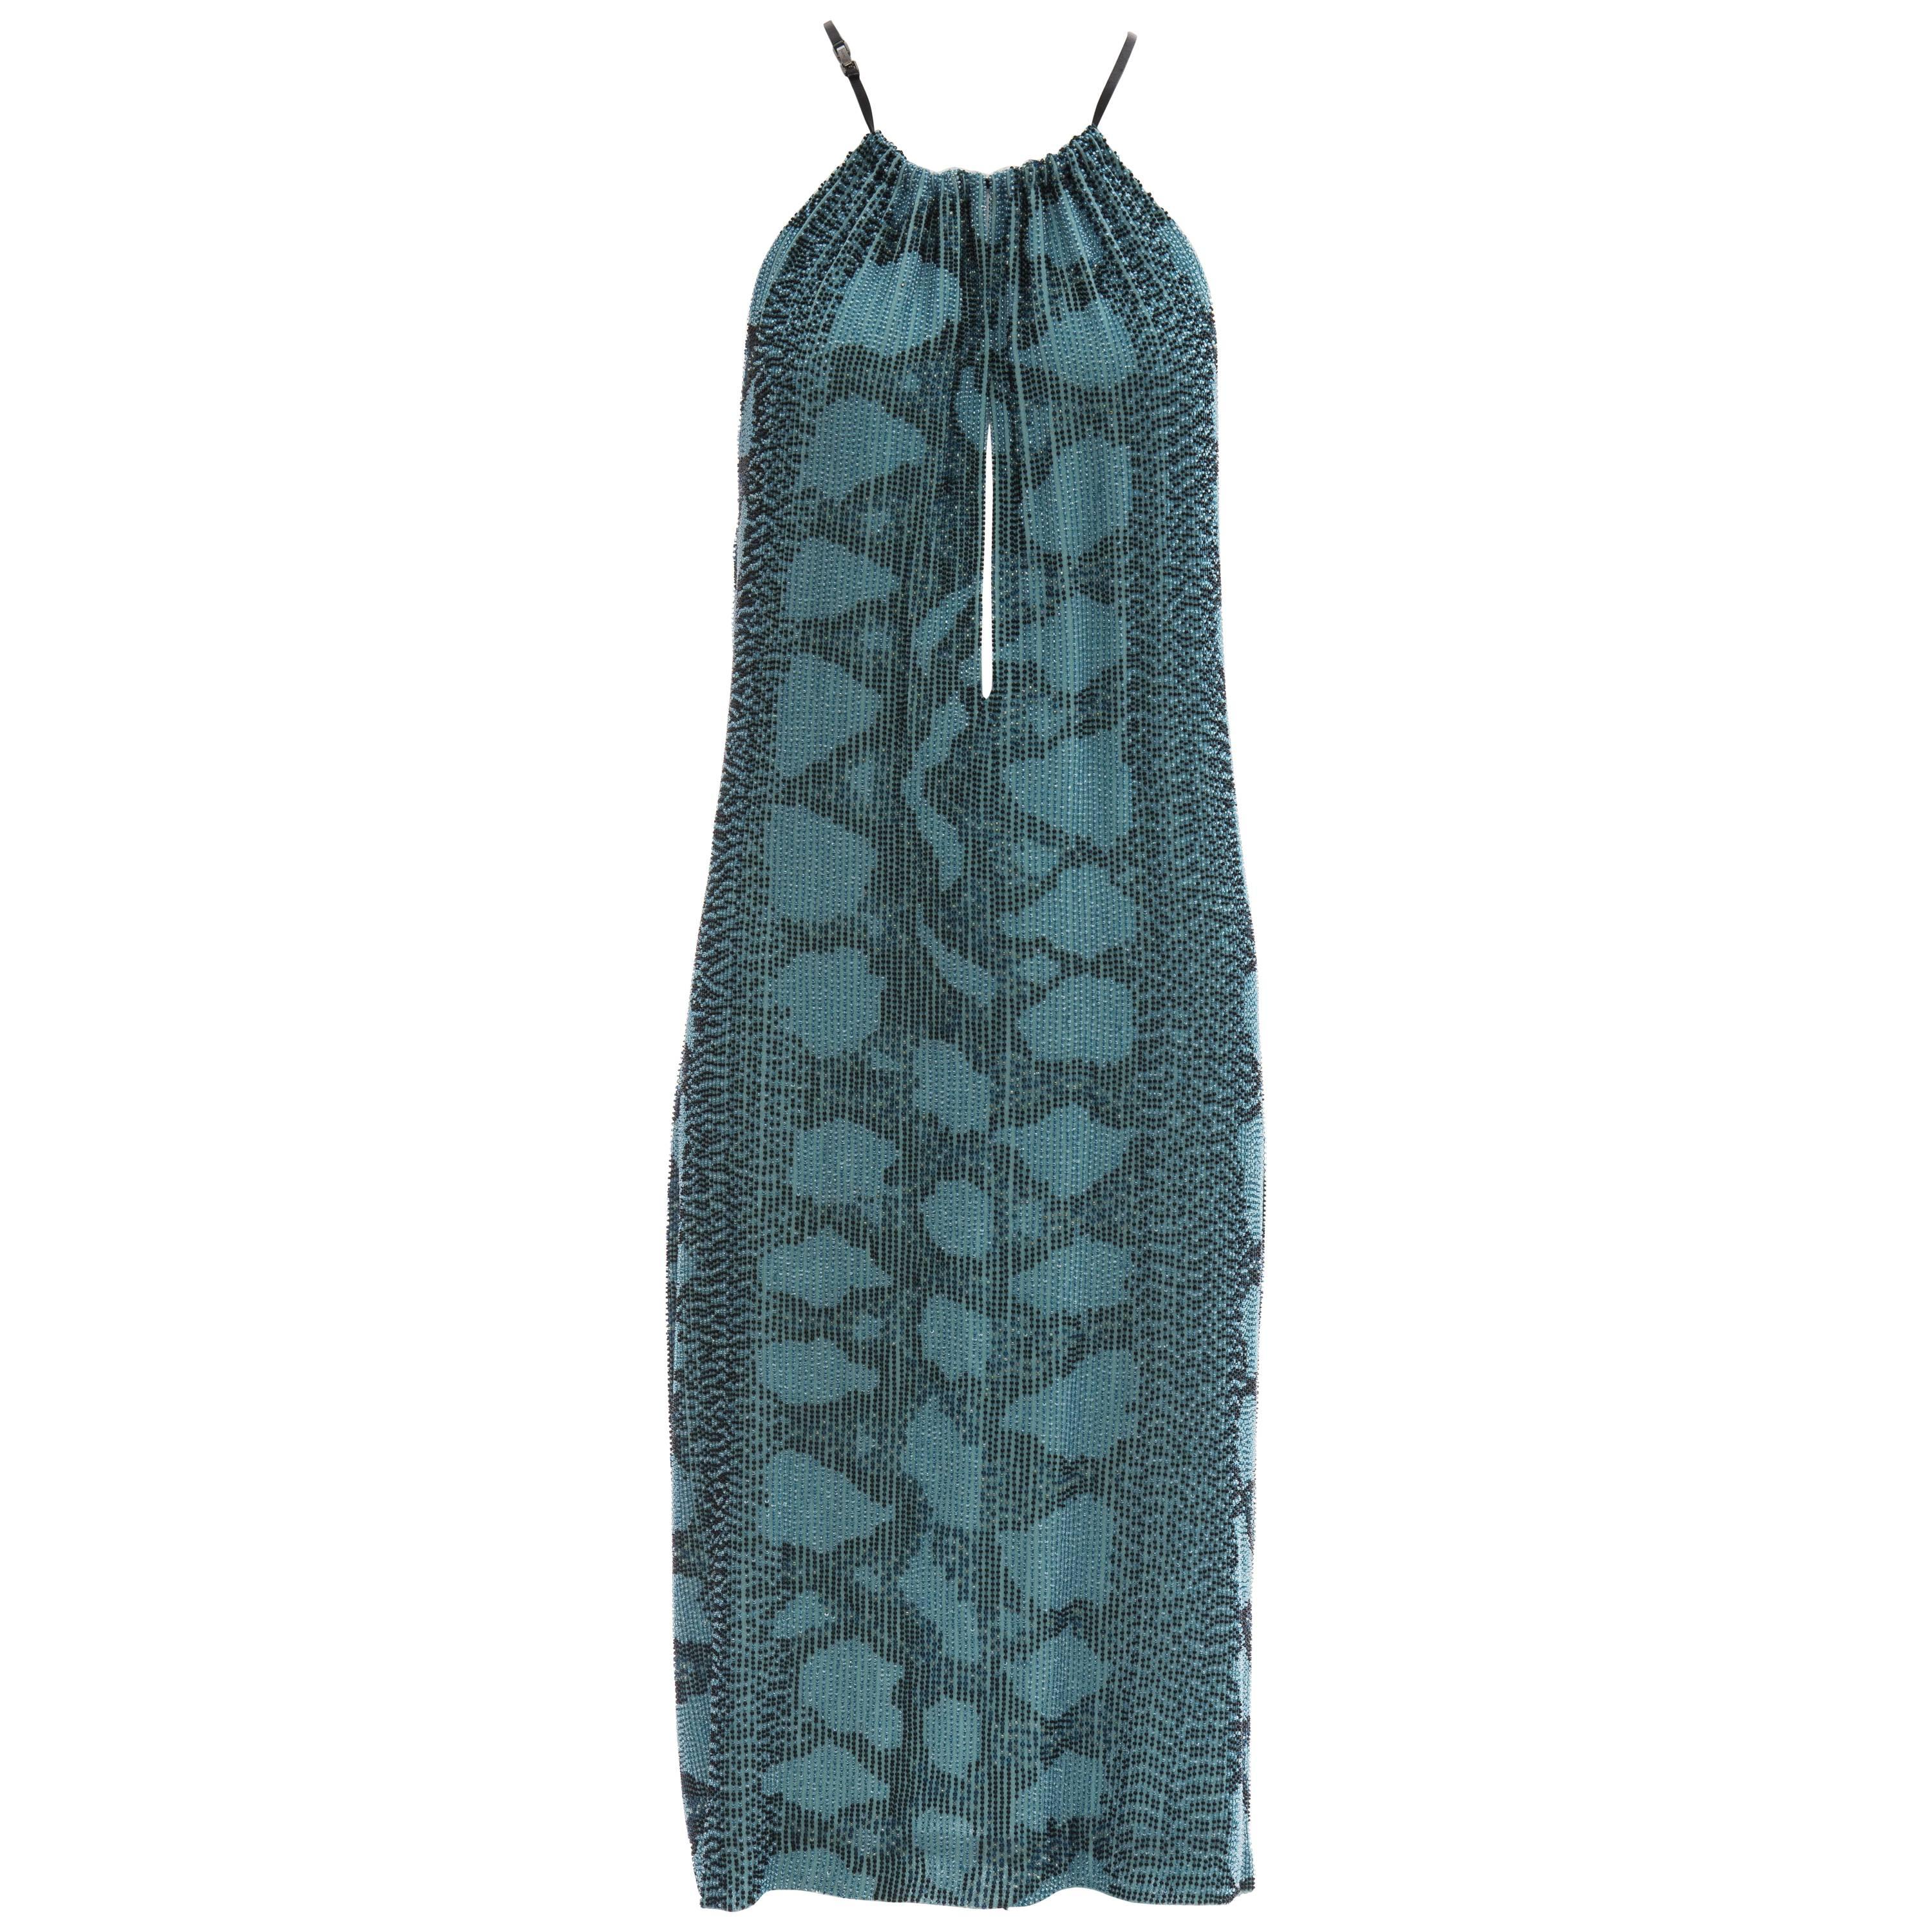 Tom Ford for Gucci Runway Silk Beaded Python Print Shift Dress, Spring 2000 For Sale